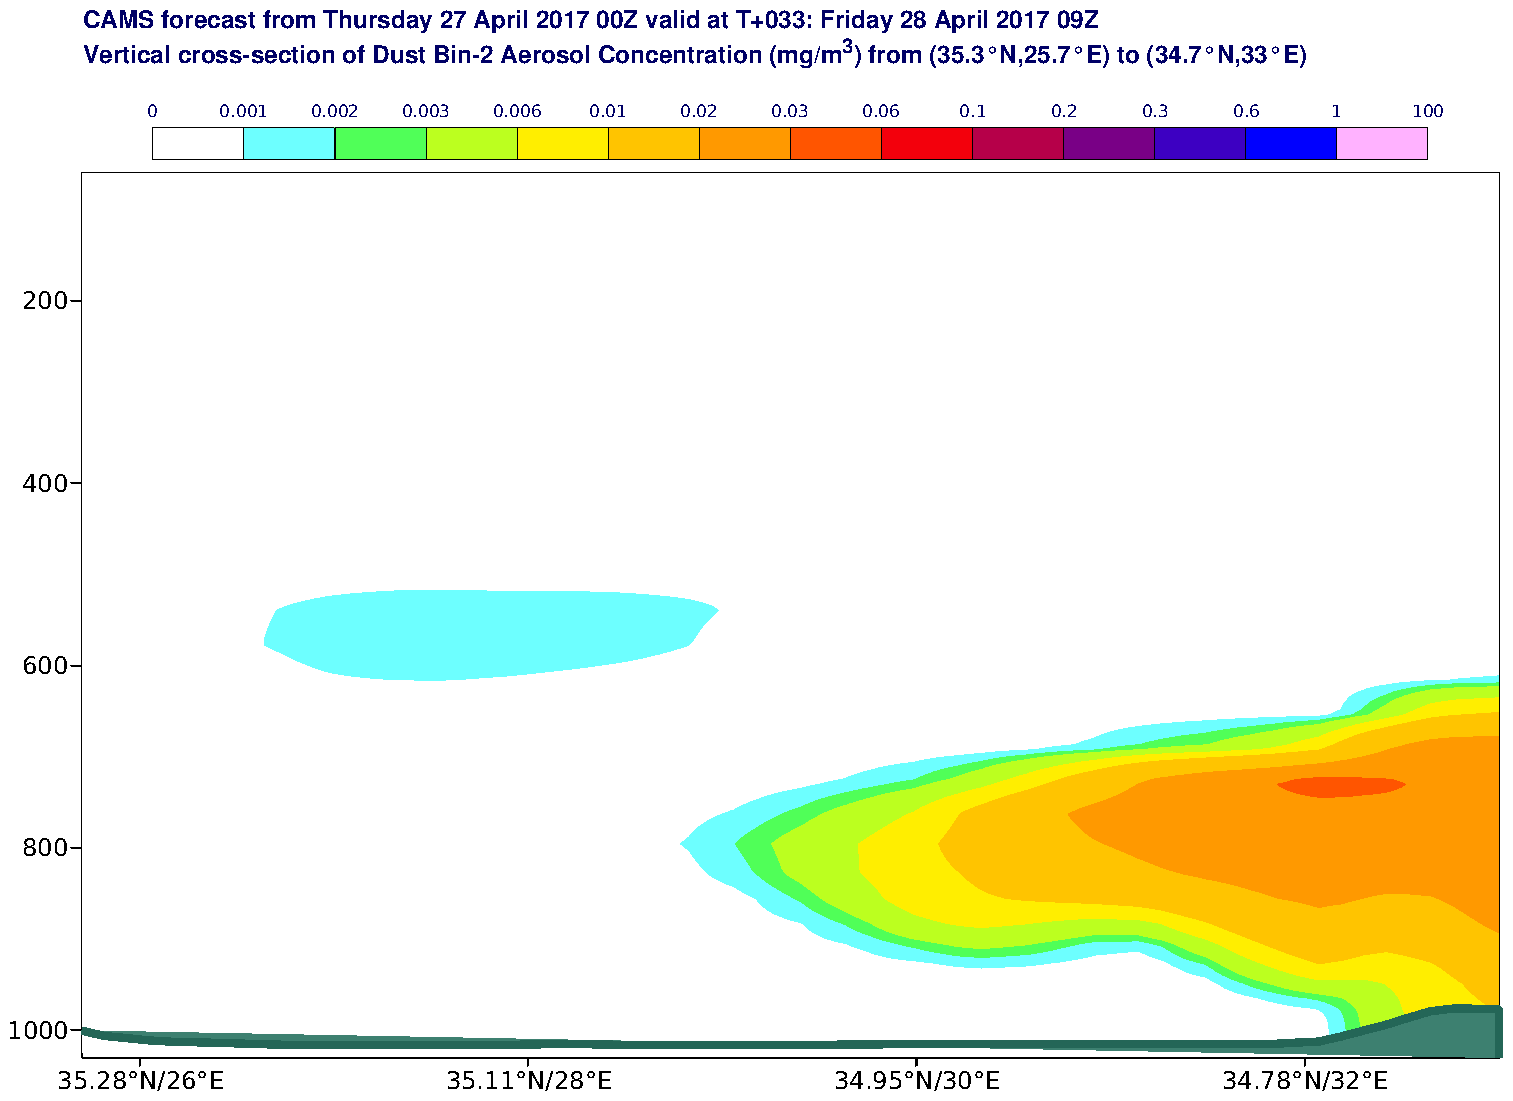 Vertical cross-section of Dust Bin-2 Aerosol Concentration (mg/m3) valid at T33 - 2017-04-28 09:00